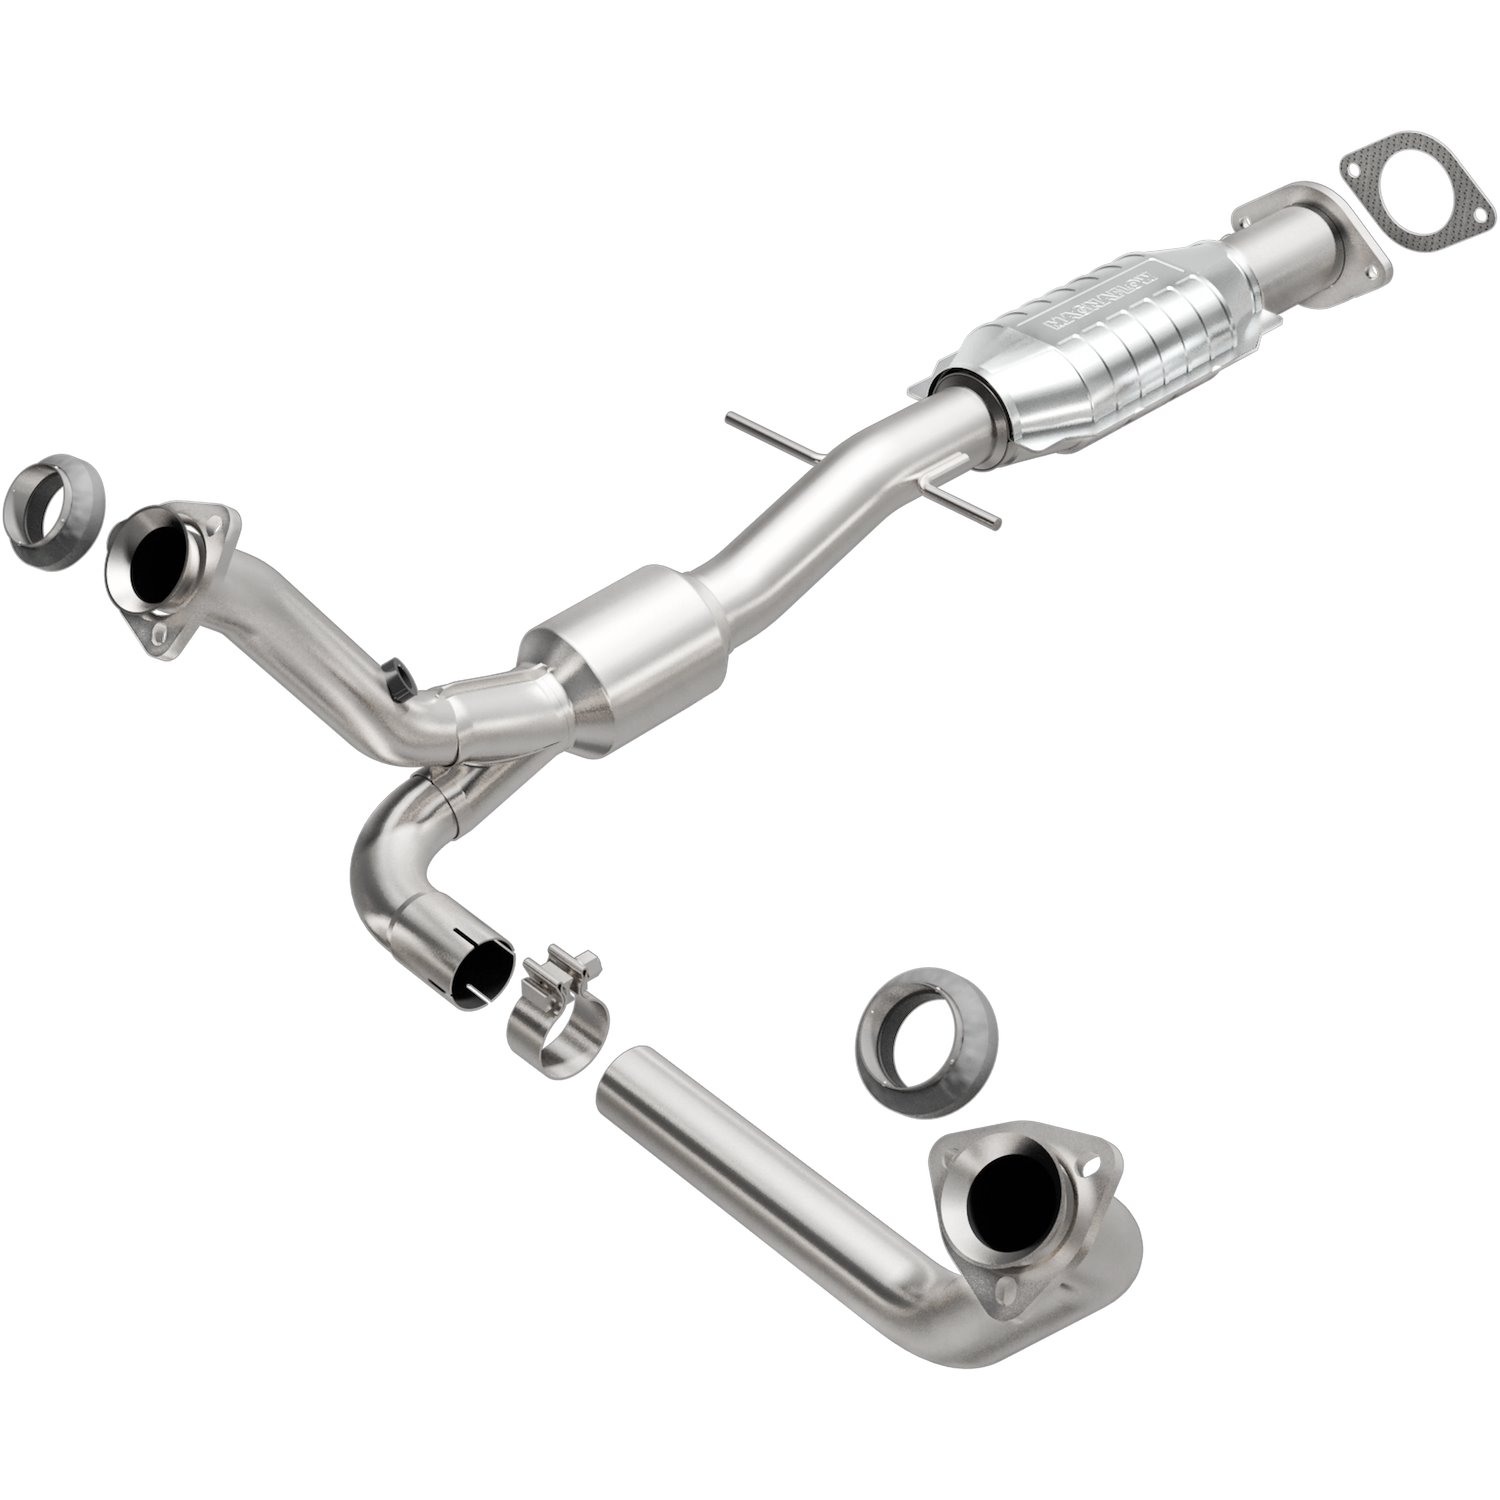 Direct-Fit Catalytic Converter 2000-02 GM S10/Sonoma/Hombre 2WD 4.3L (Rear)